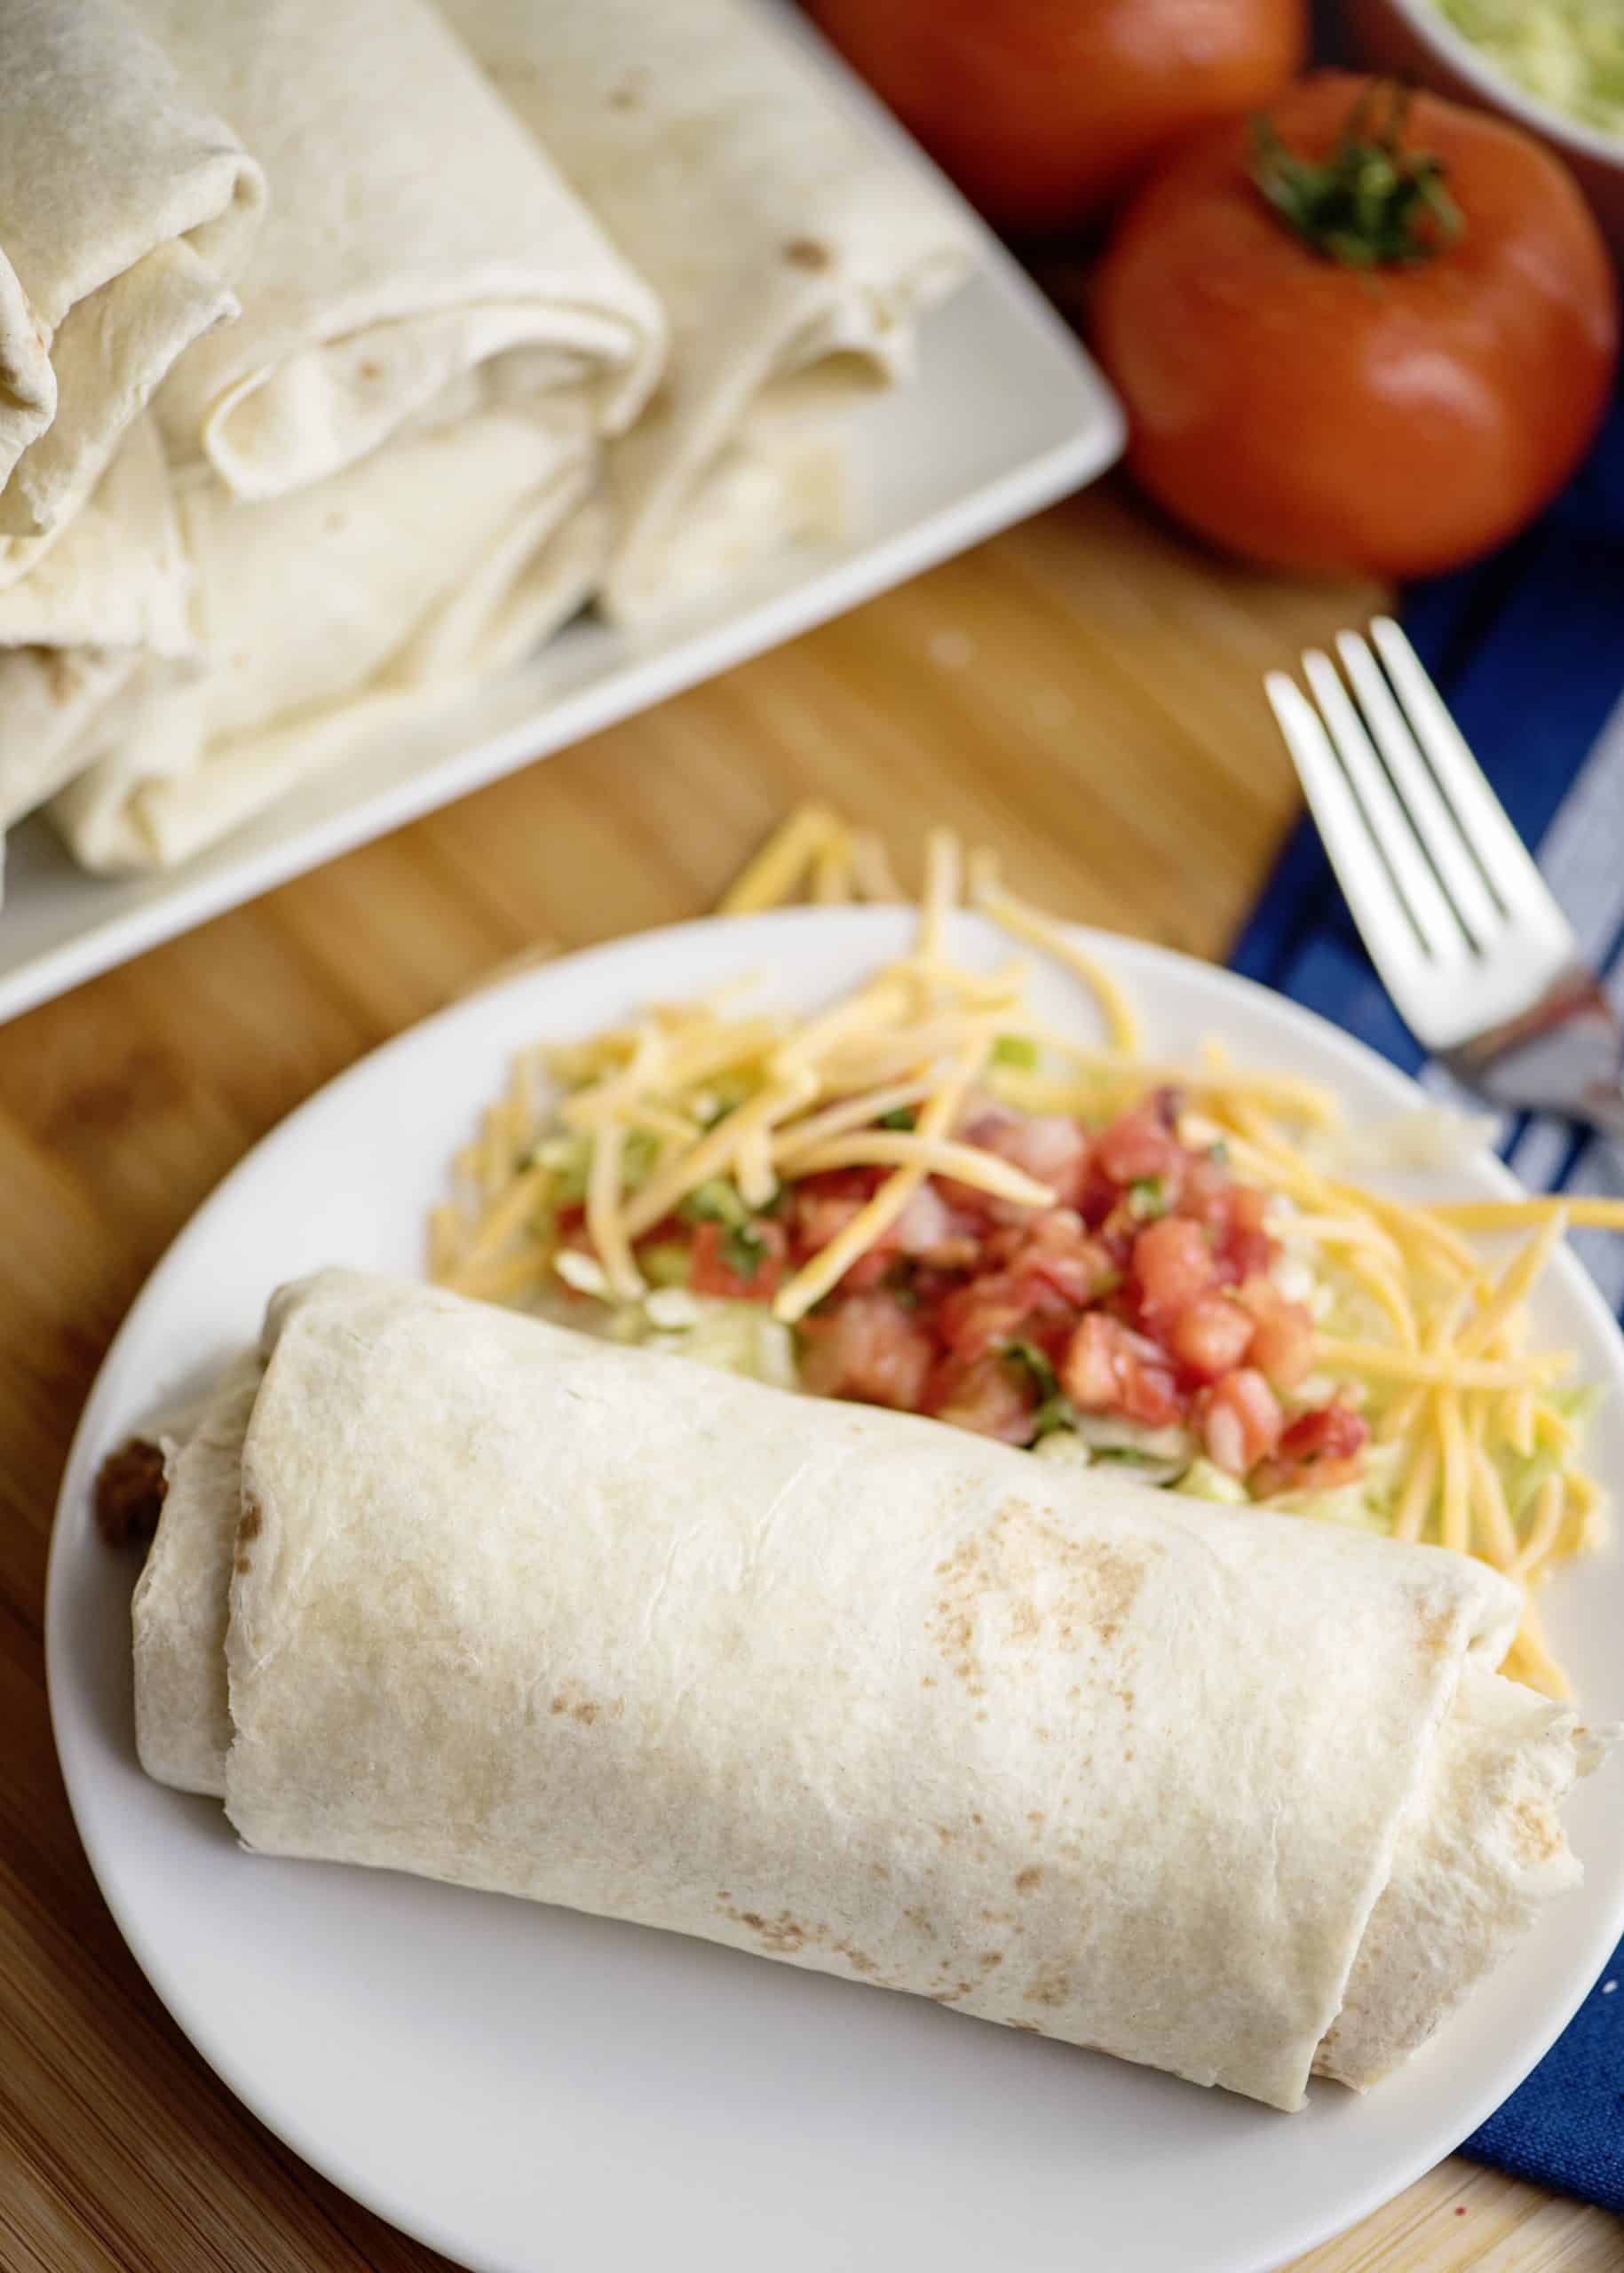 Beef and Bean Burritos With Cheese (Freezer Recipe) - Southern Plate